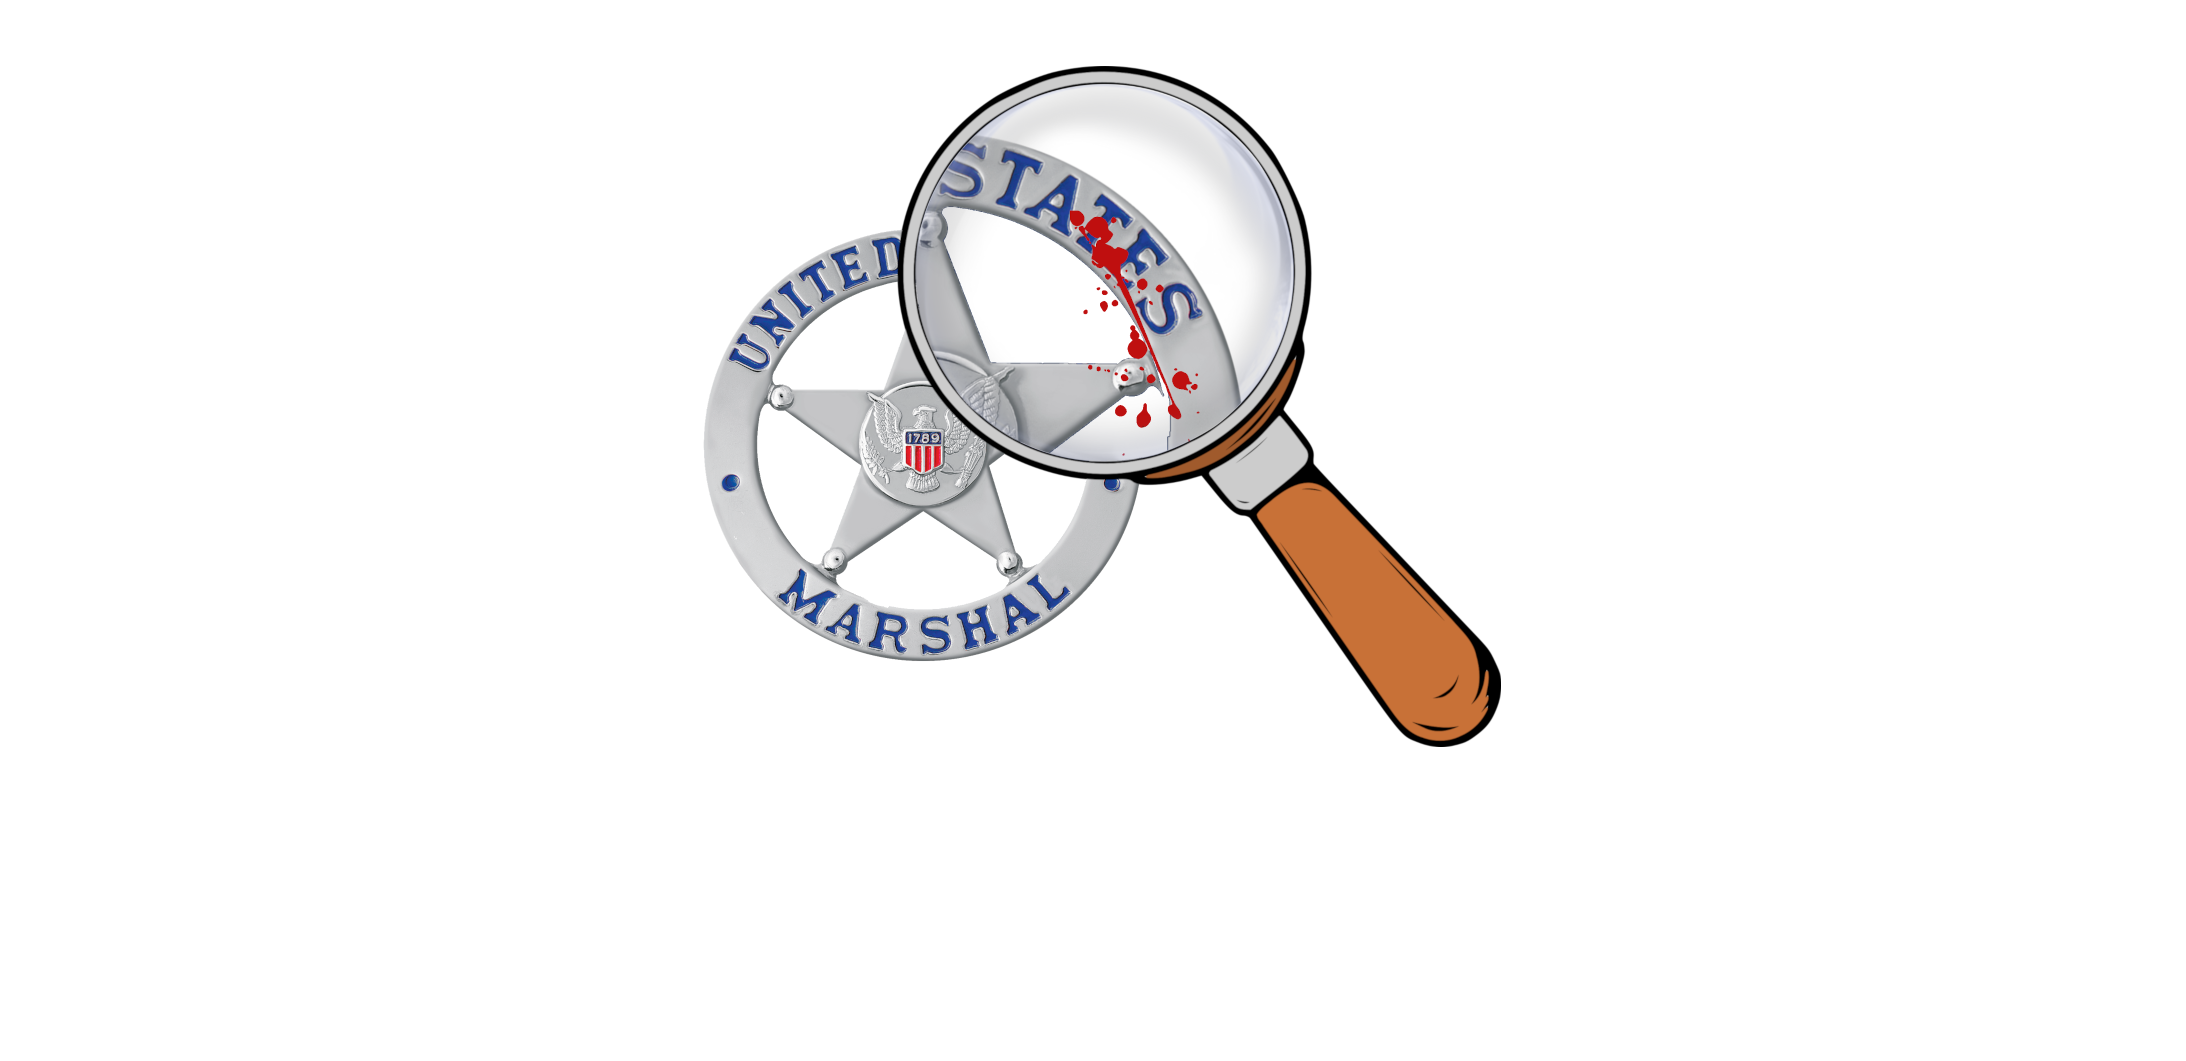 US MARSHAL’S ACCOUNTABILITY PROJECT (MAP)